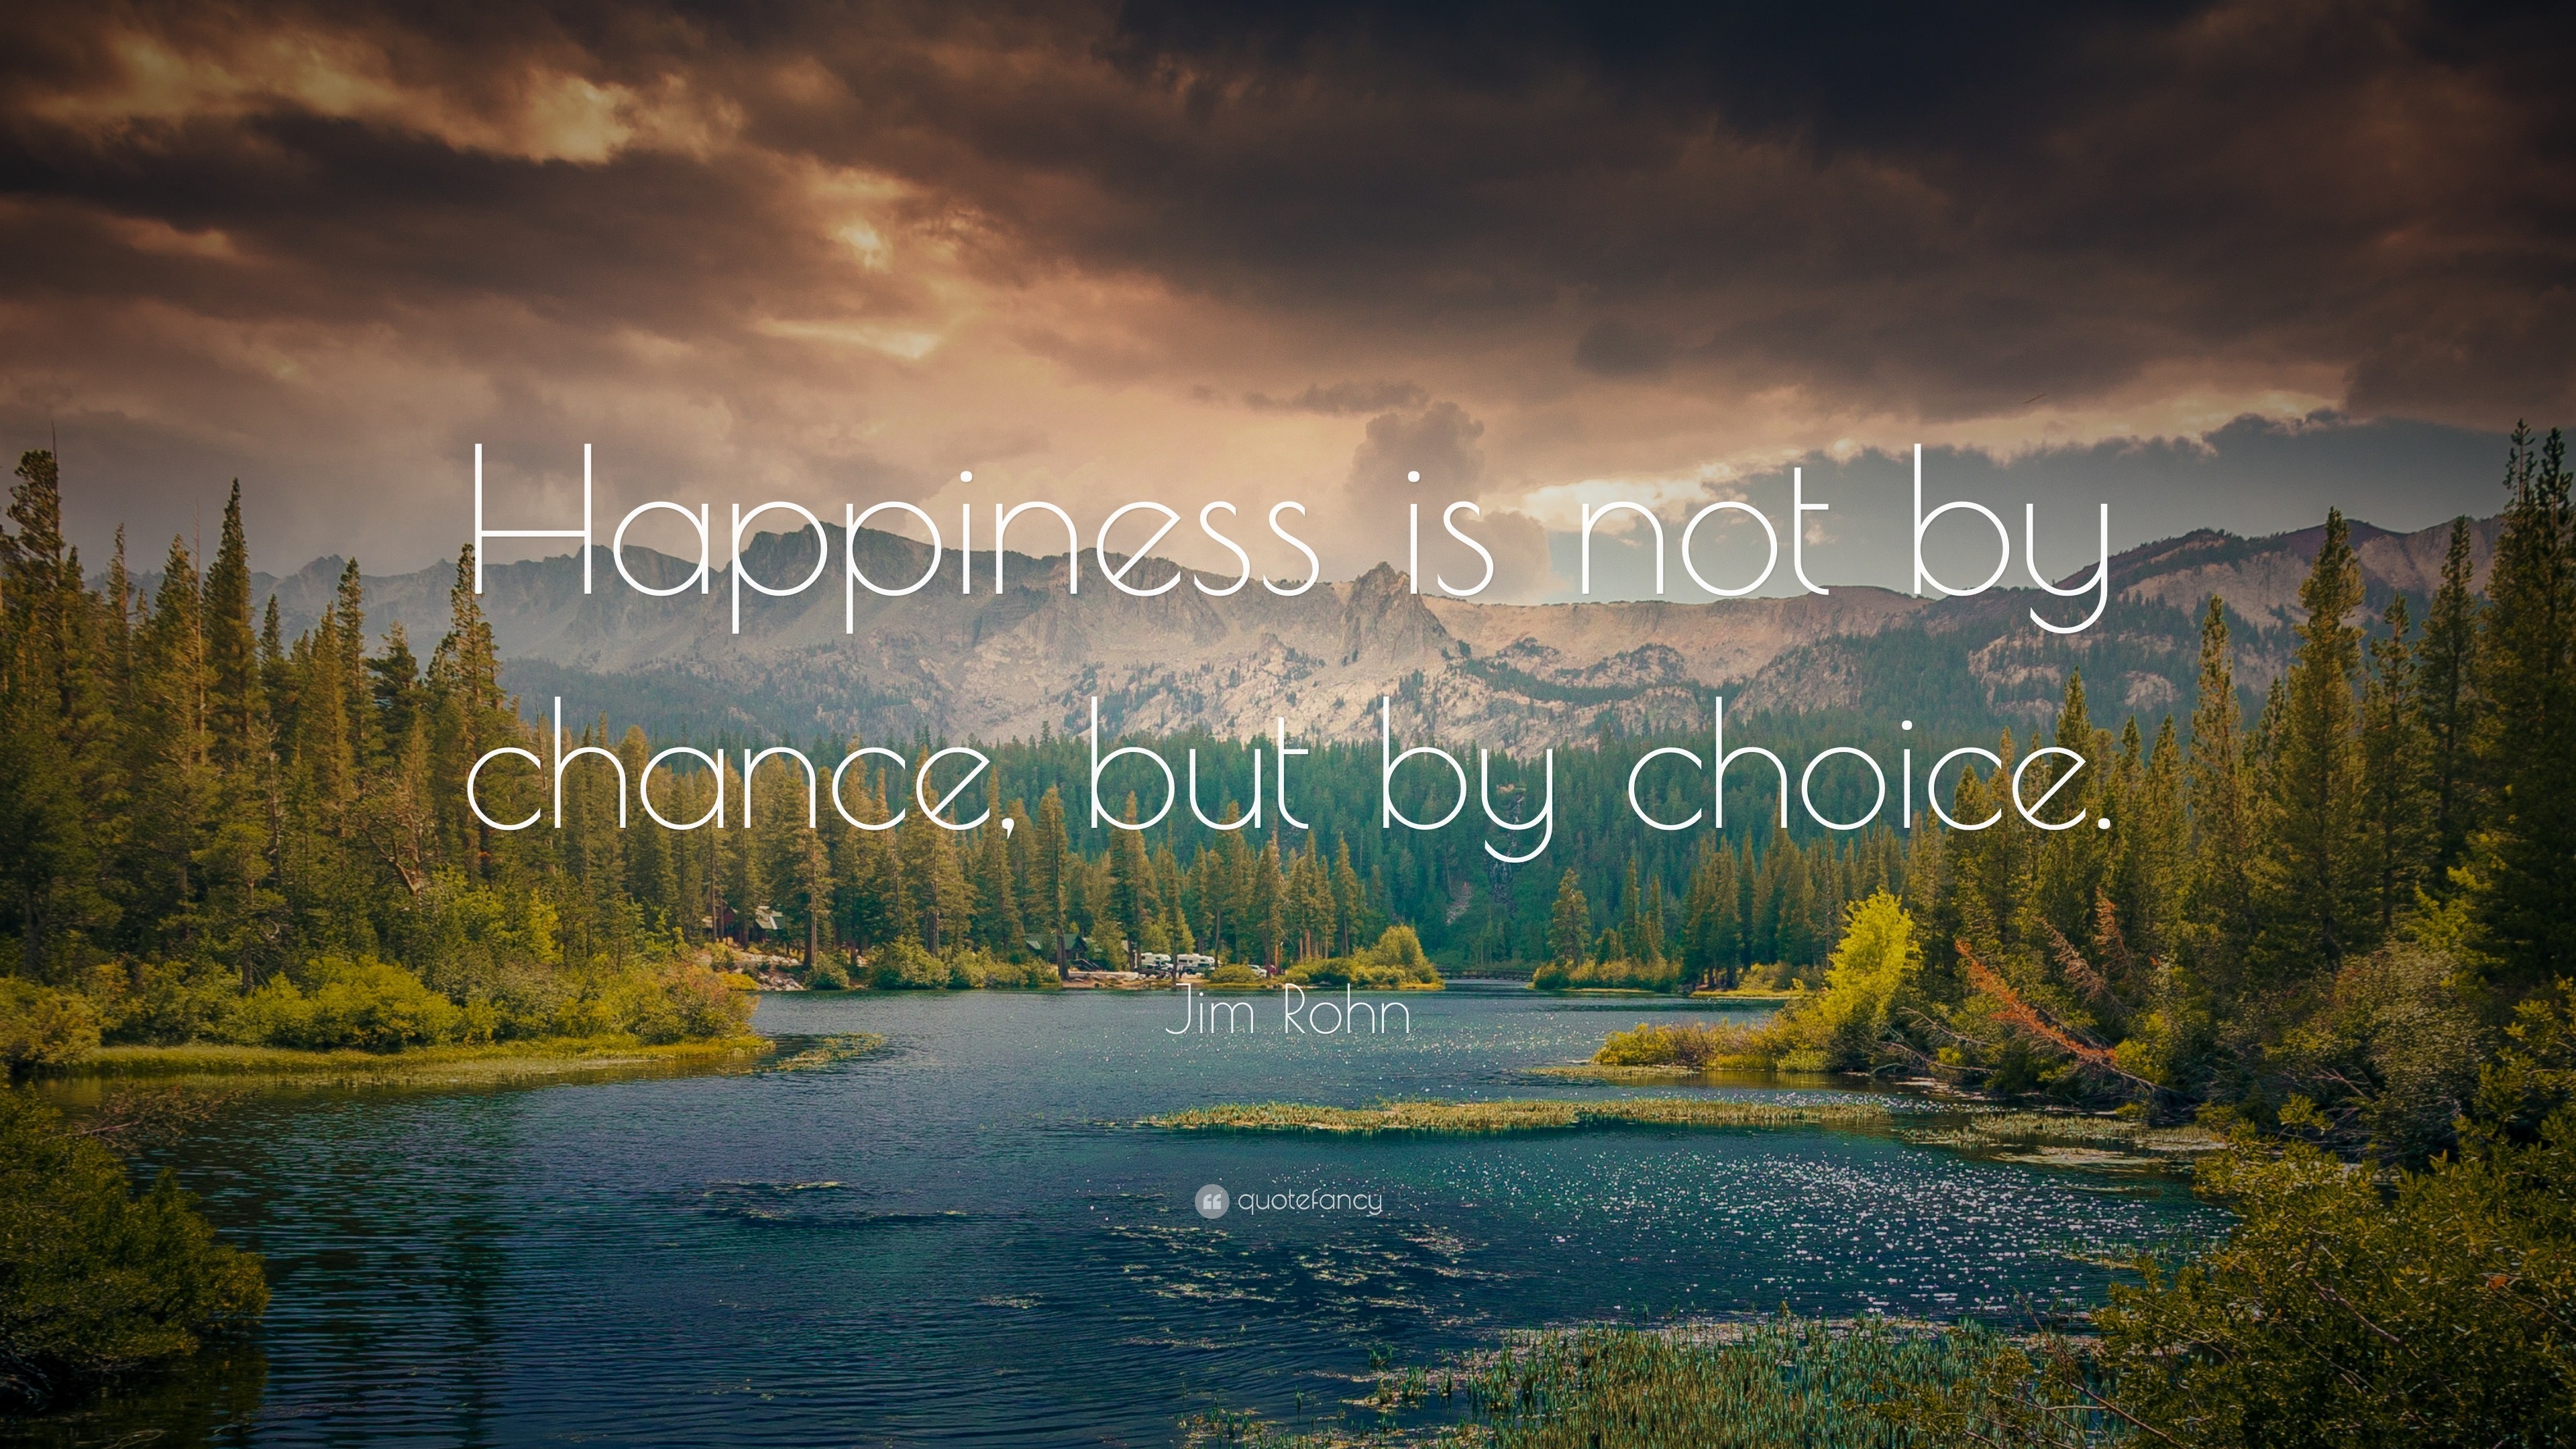 3840x2160  Attitude Quotes: “Happiness is not by chance, but by choice.” —